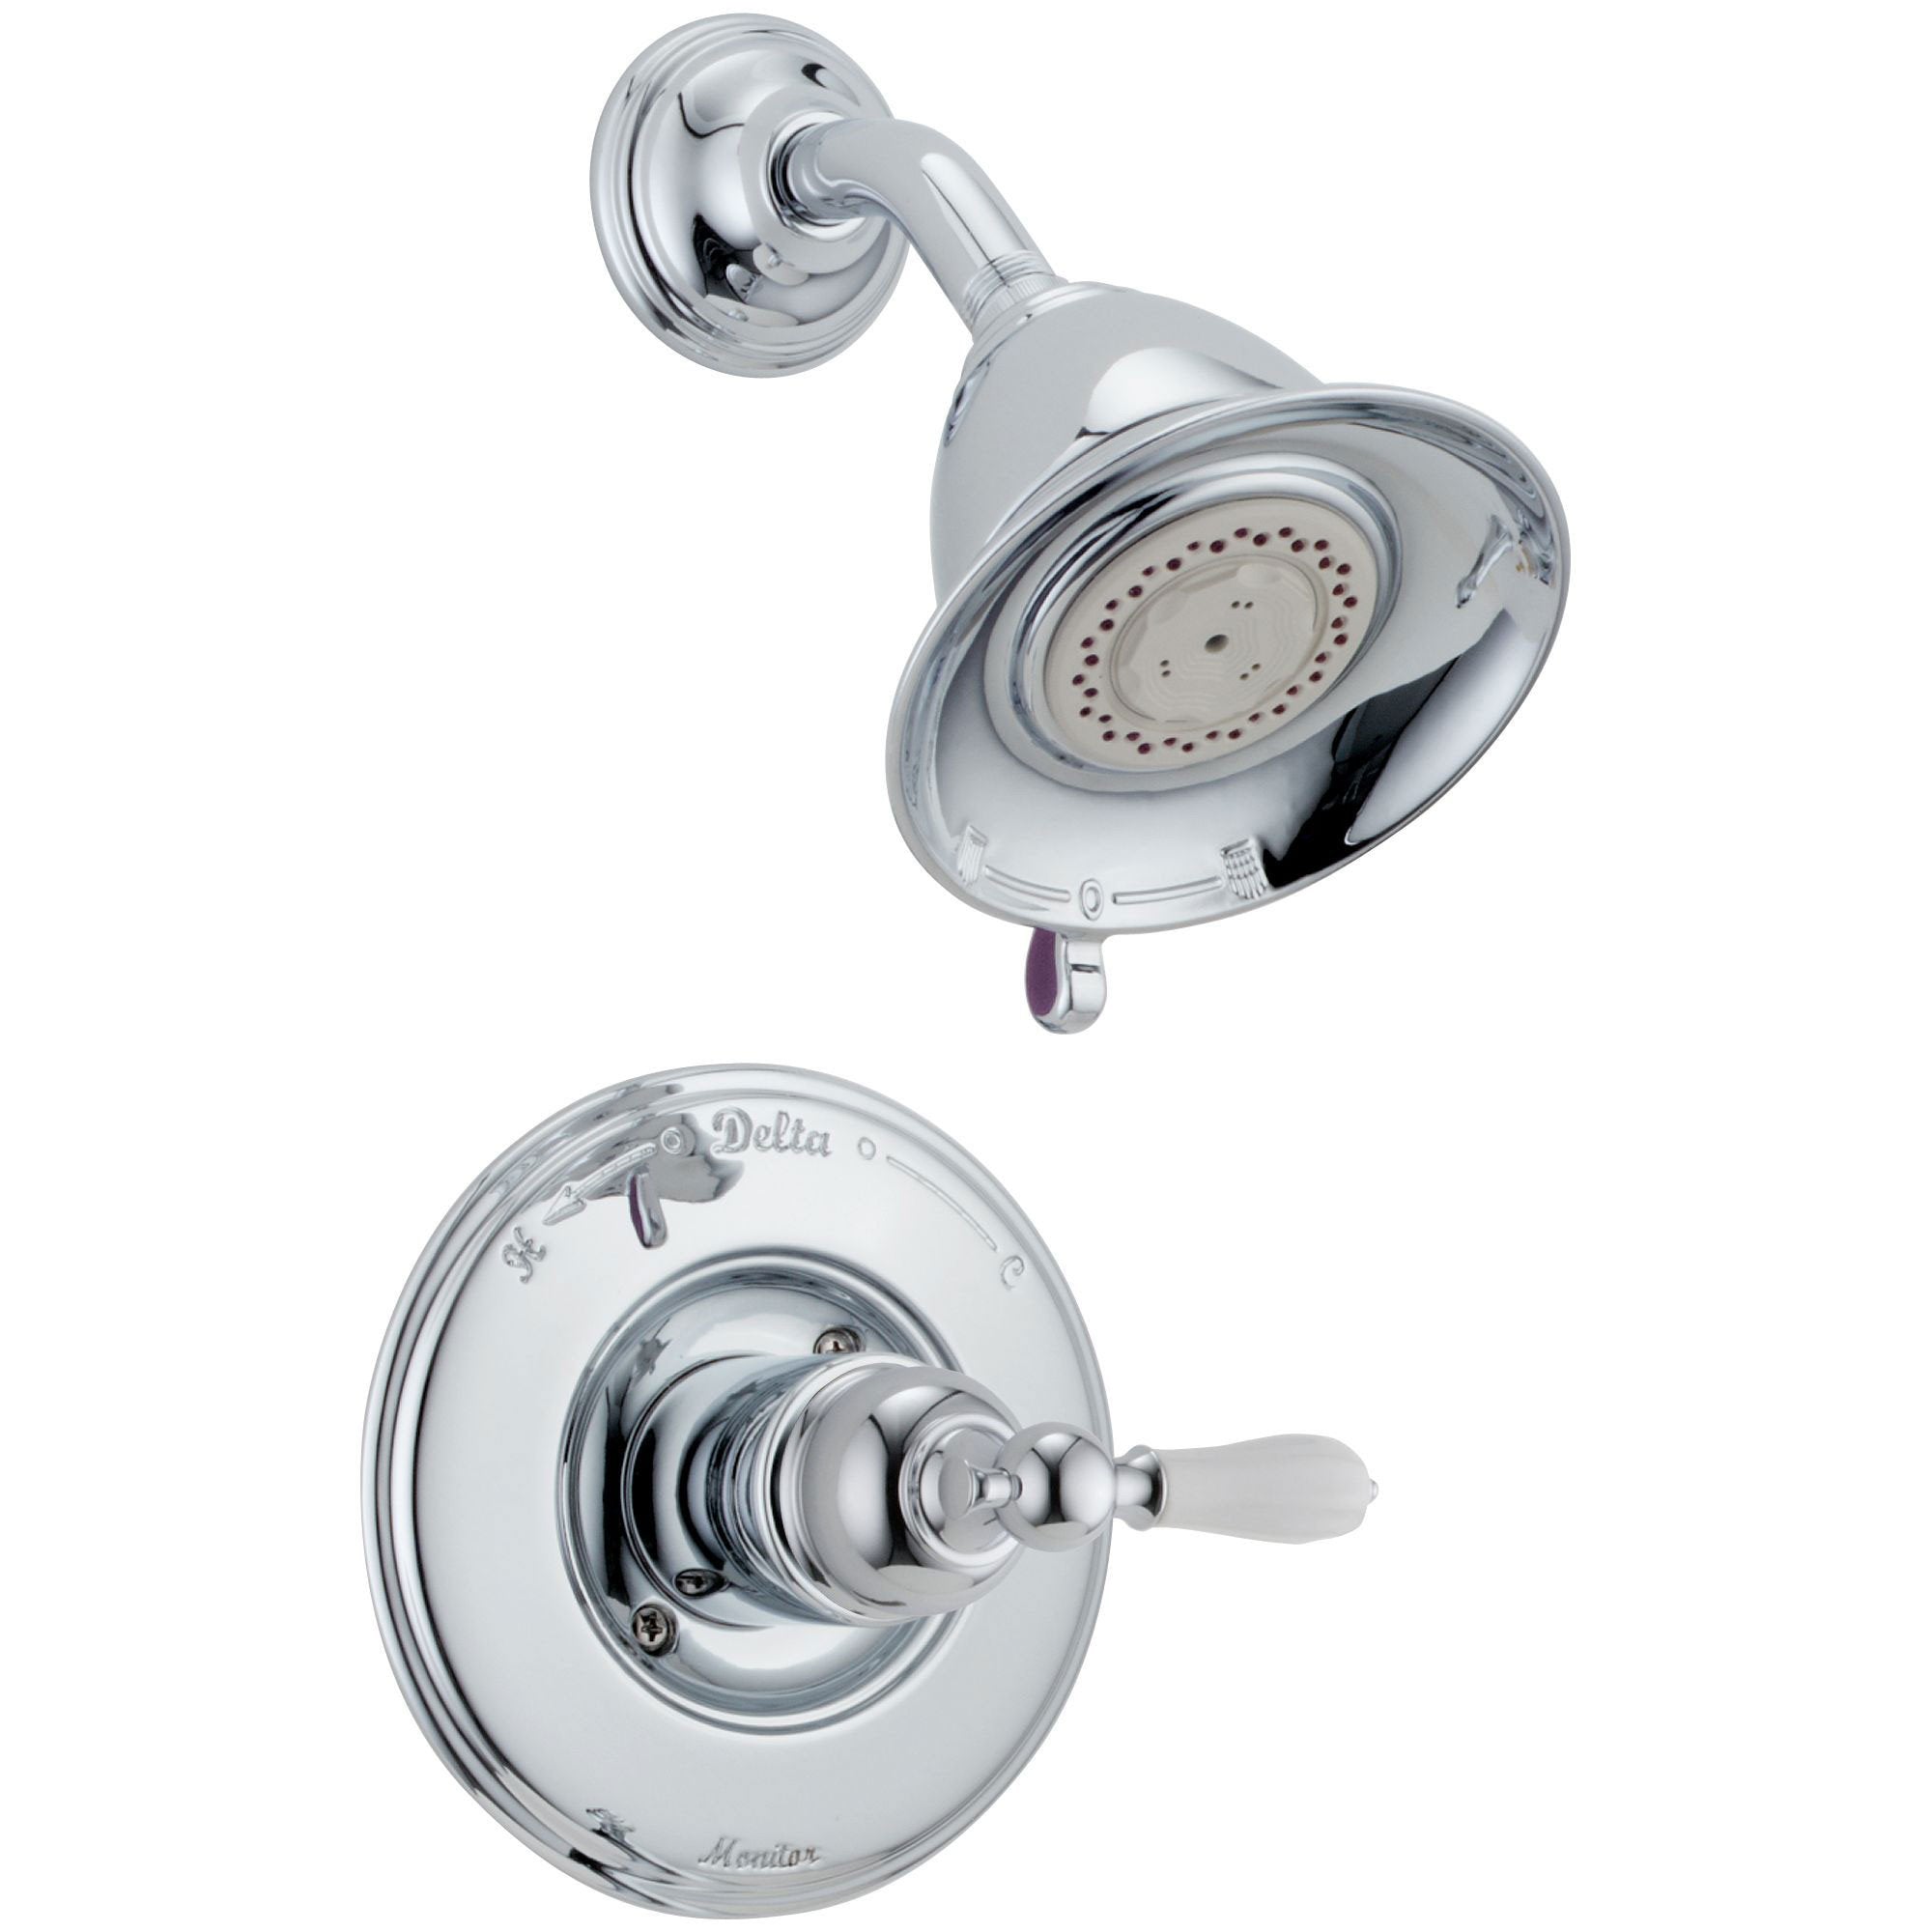 Delta Traditional Victorian Chrome Finish 14 Series Shower Only Faucet INCLUDES Rough-in Valve with Stops and White Lever Handle D1205V